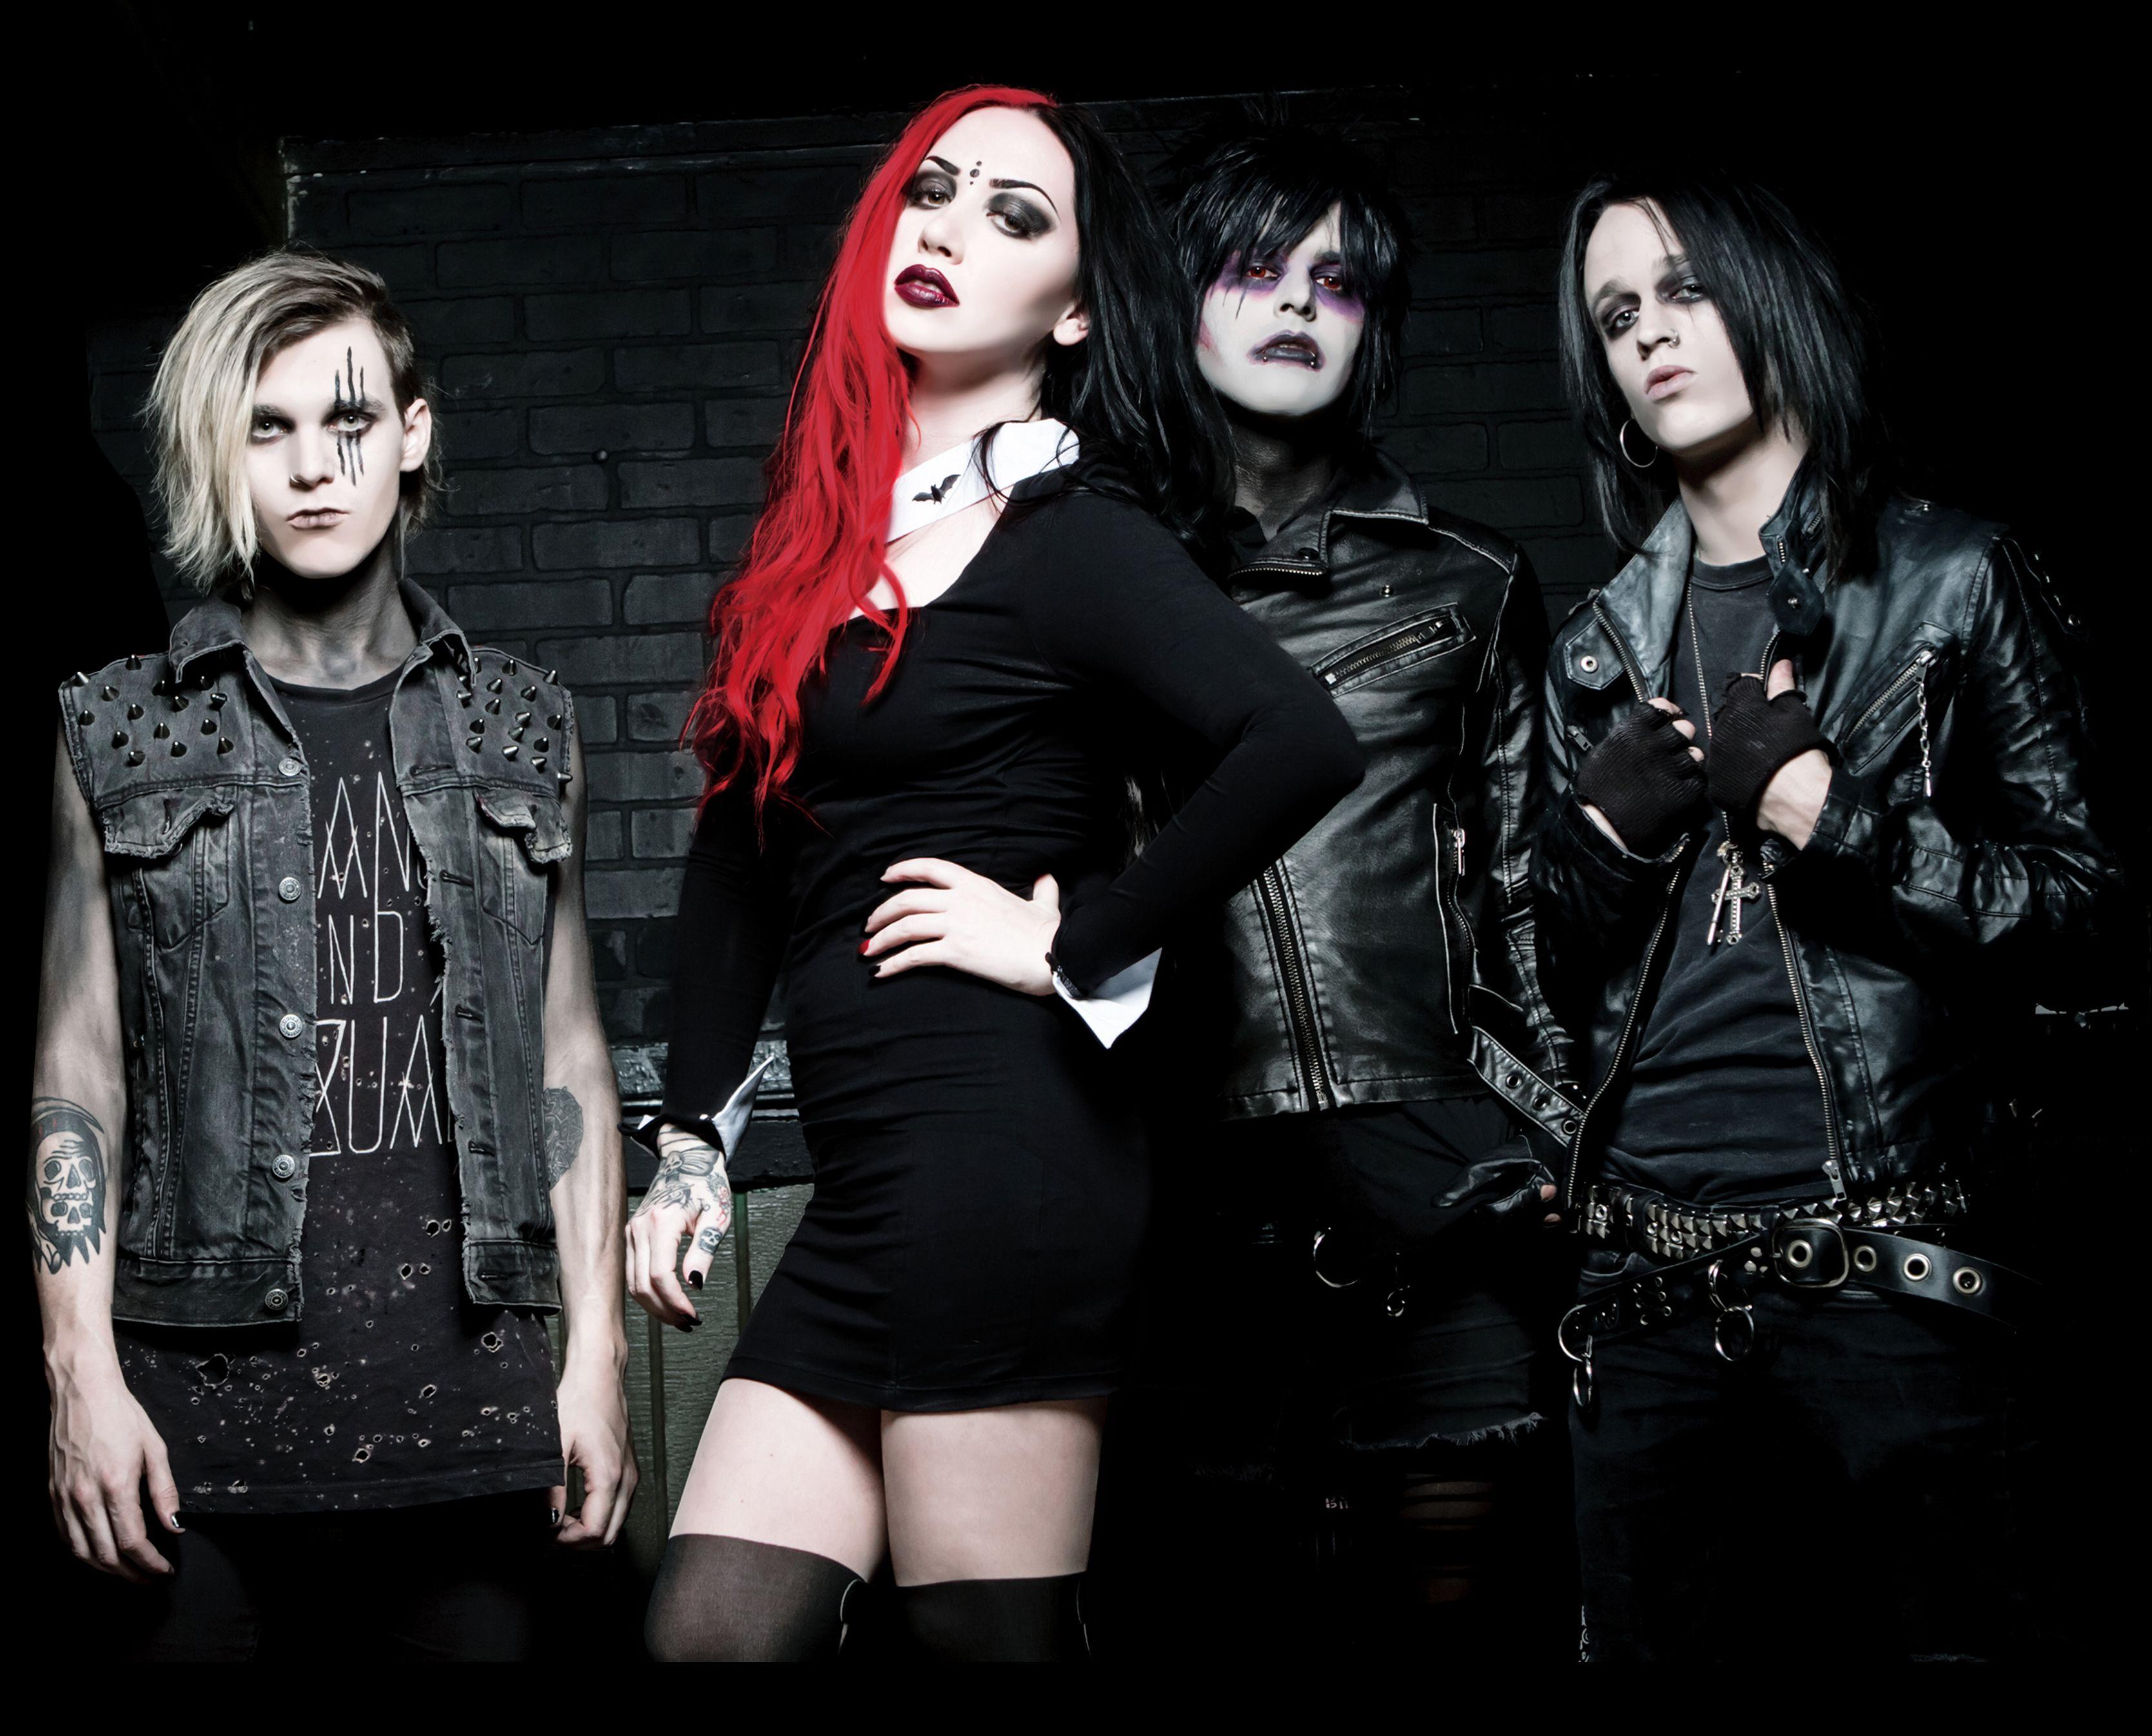 NEW YEARS DAY * GET SCARED * EYES SET TO KILL * THE RELAPSE